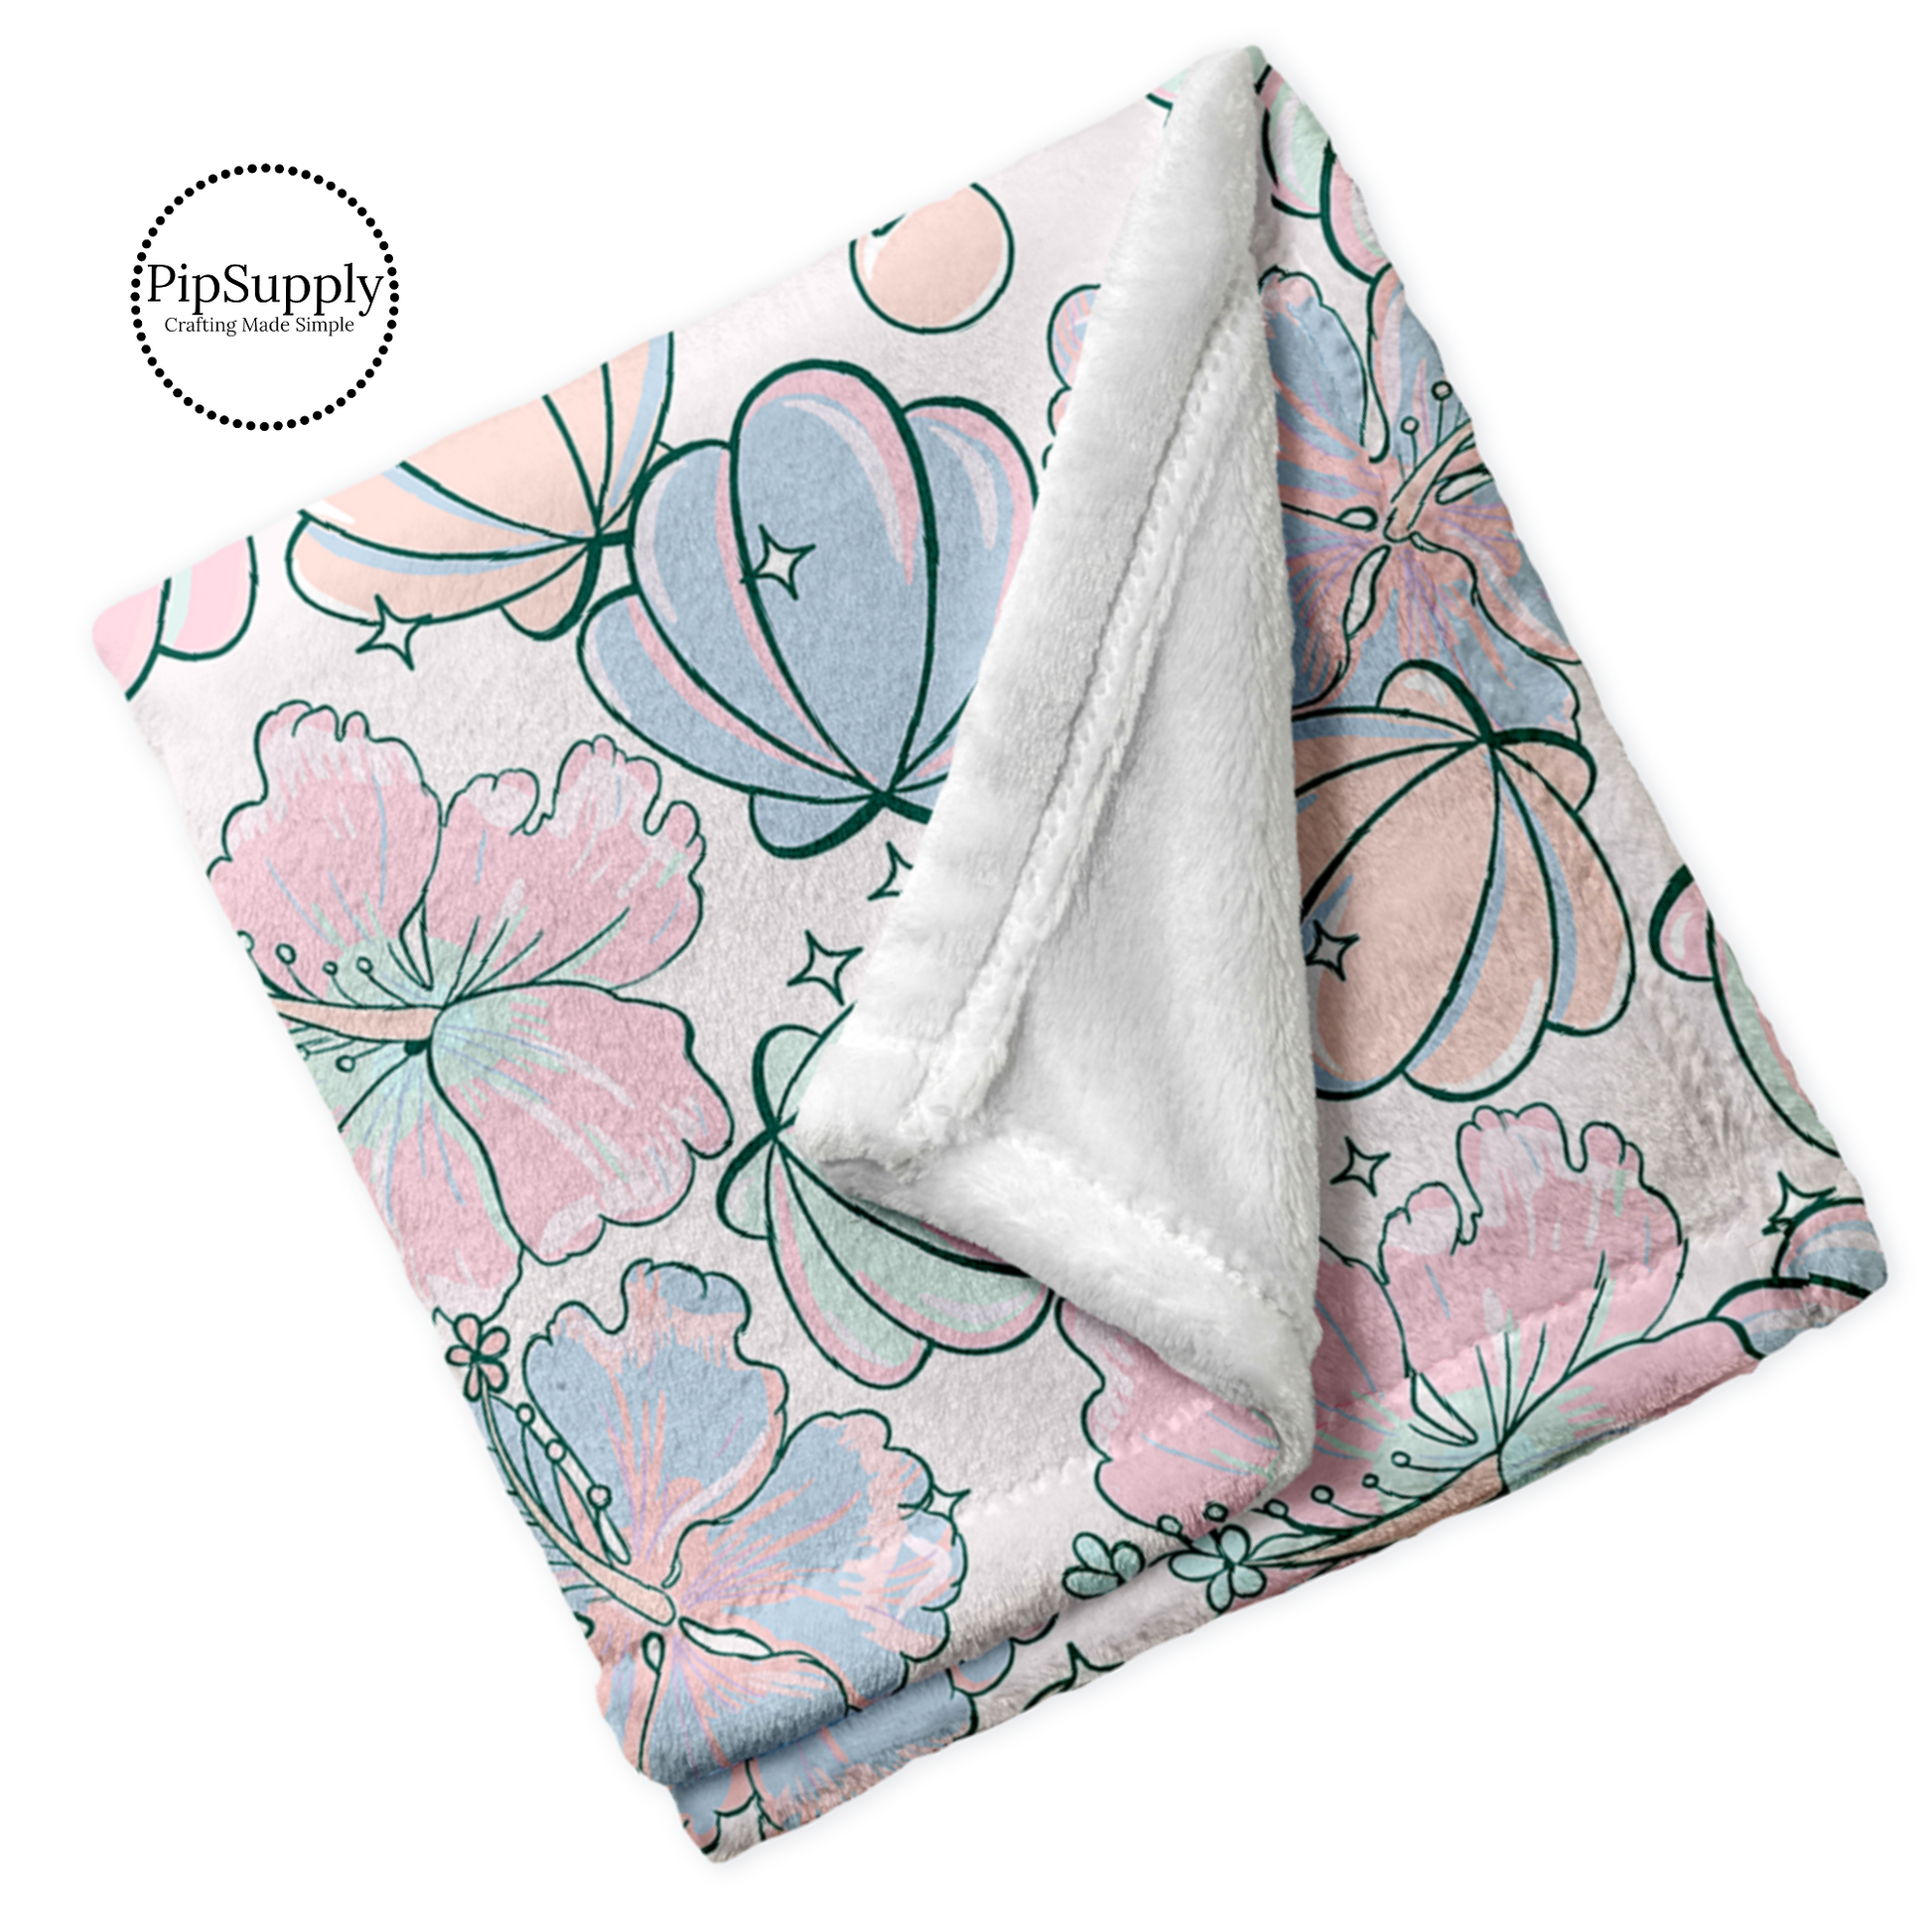 Soft white folded blanket with top print of pastel pink, blue, and orange sea shells and hibiscus floral.